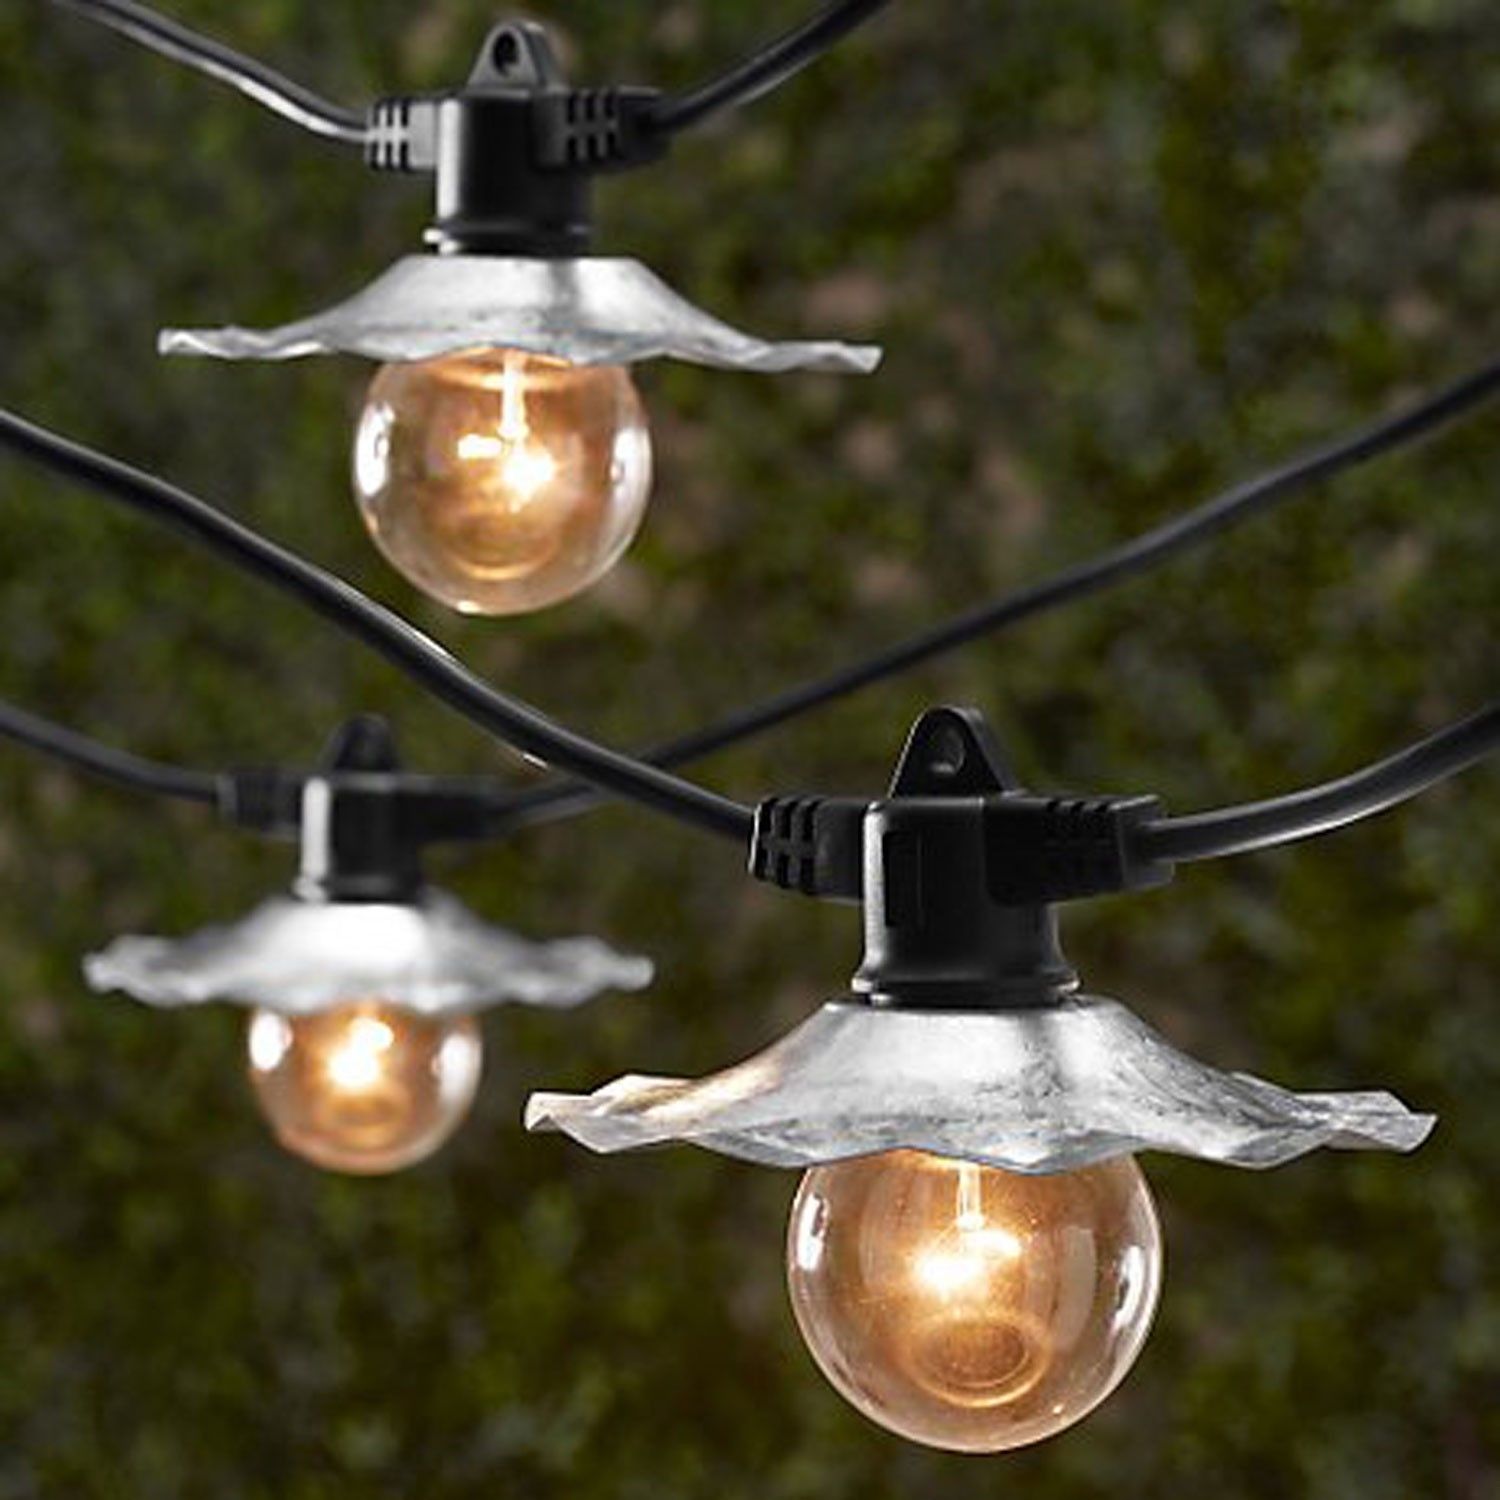 Hanging Globe String Lights With Black Wire Cool Extra Long Globe Intended For Hanging Outdoor Lights On Wire (View 11 of 15)